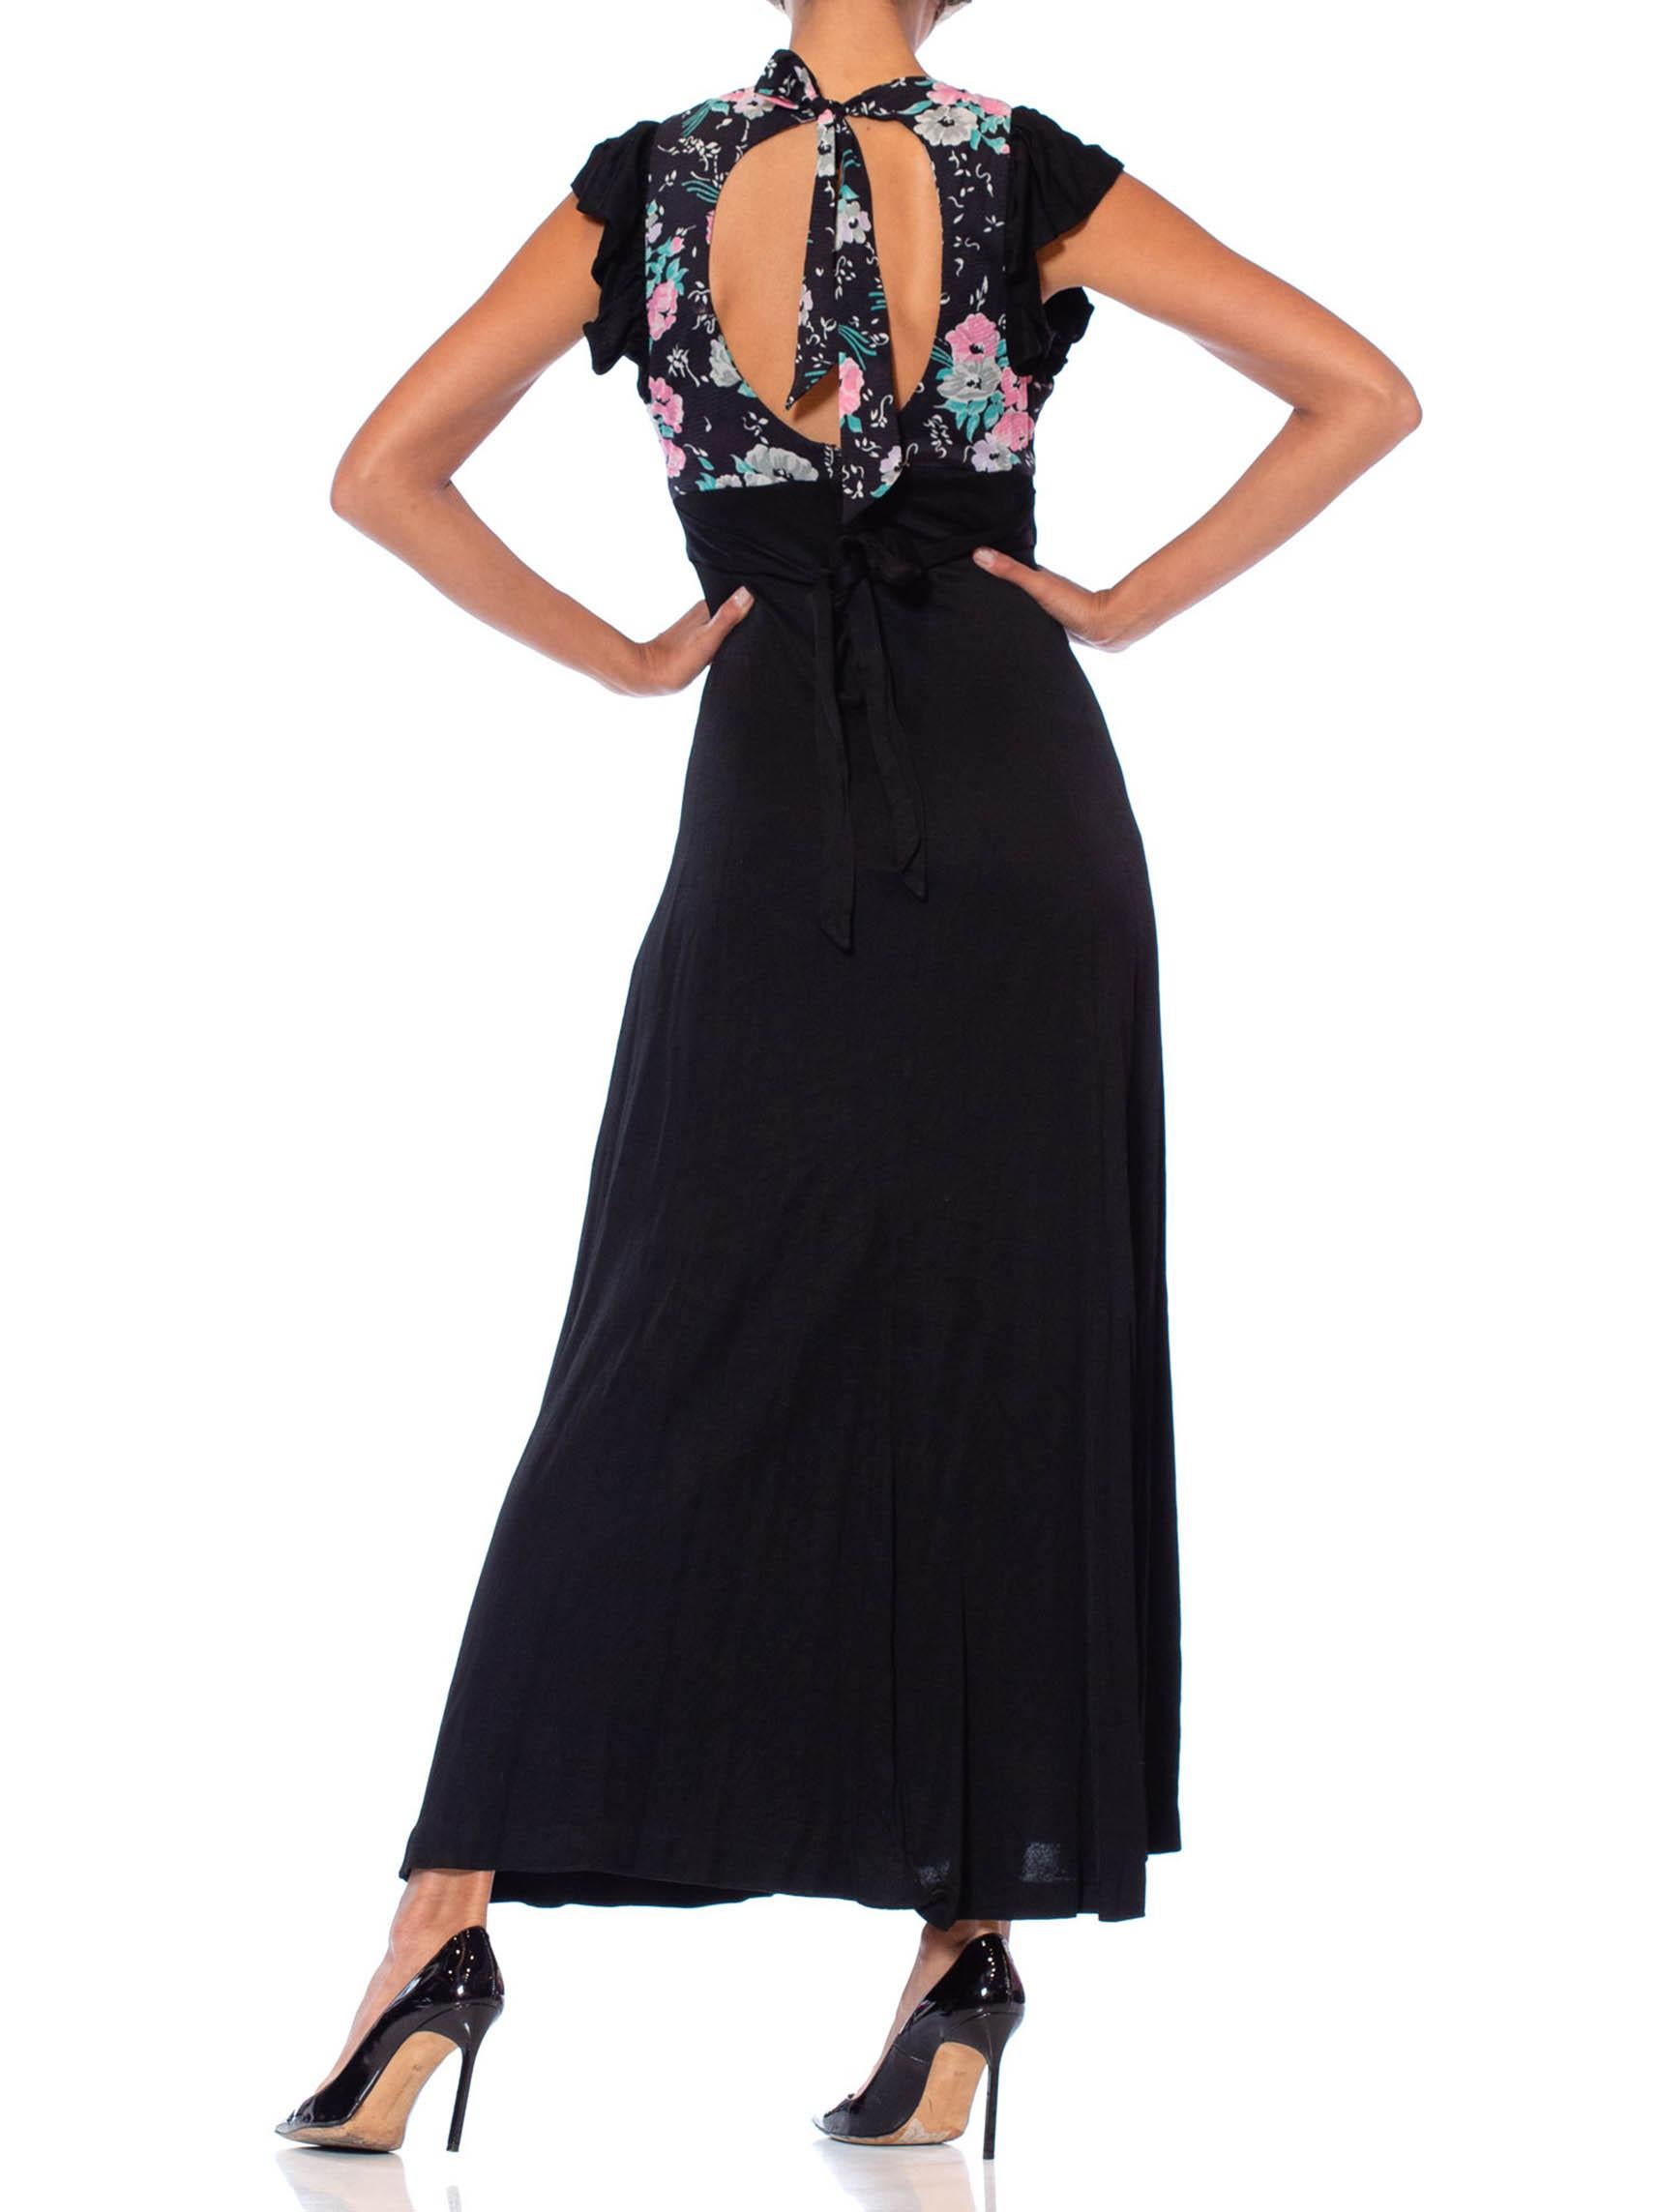 1970S Black & Floral Poly Blend Jersey Ruffled Maxi Dress With Tie Belt For Sale 2